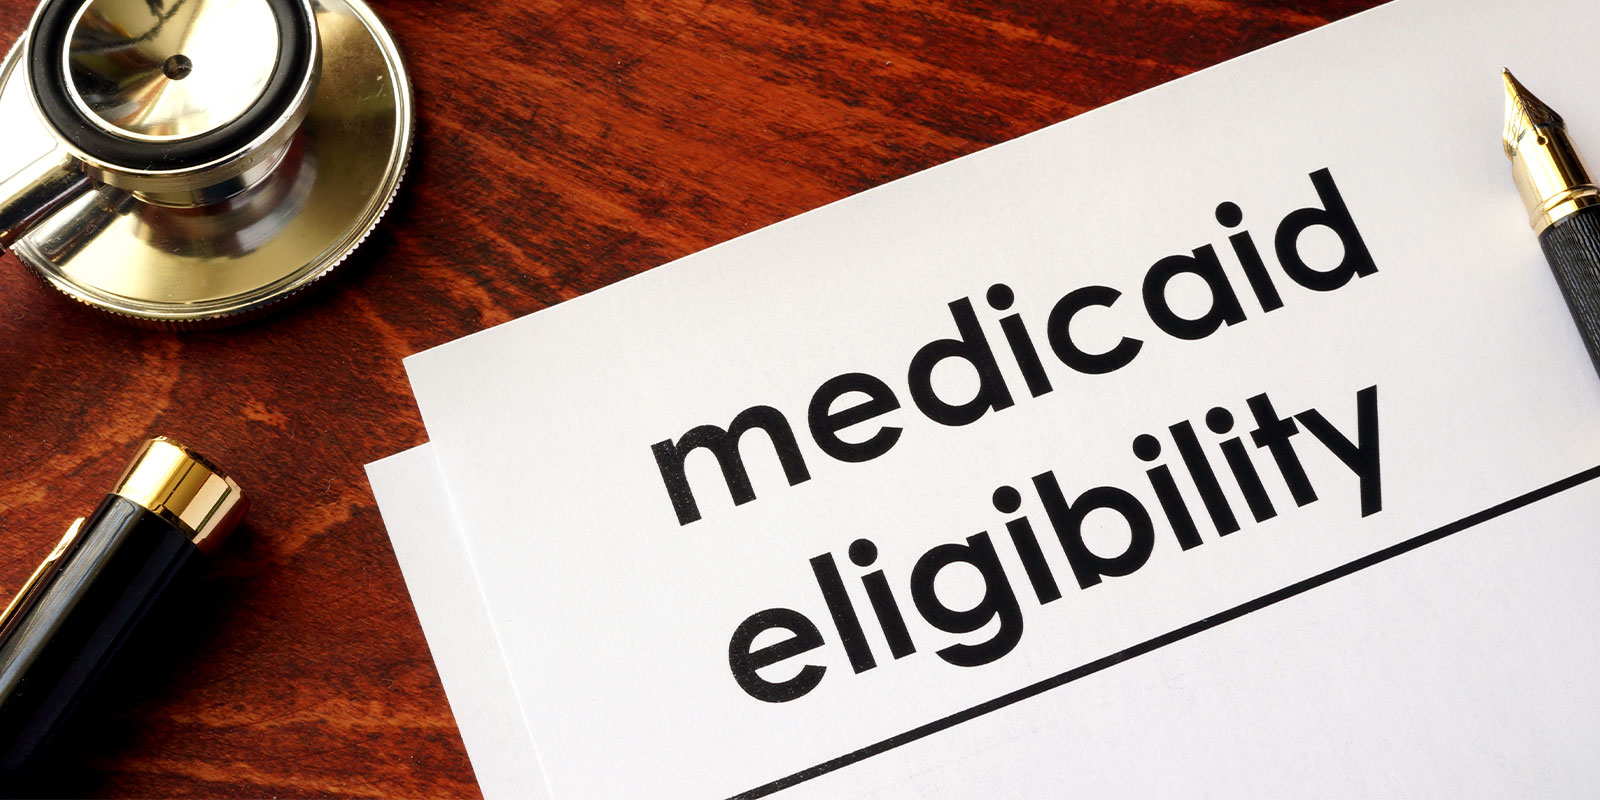 who-is-eligible-for-maryland-medicaid-insight-treatment-centers